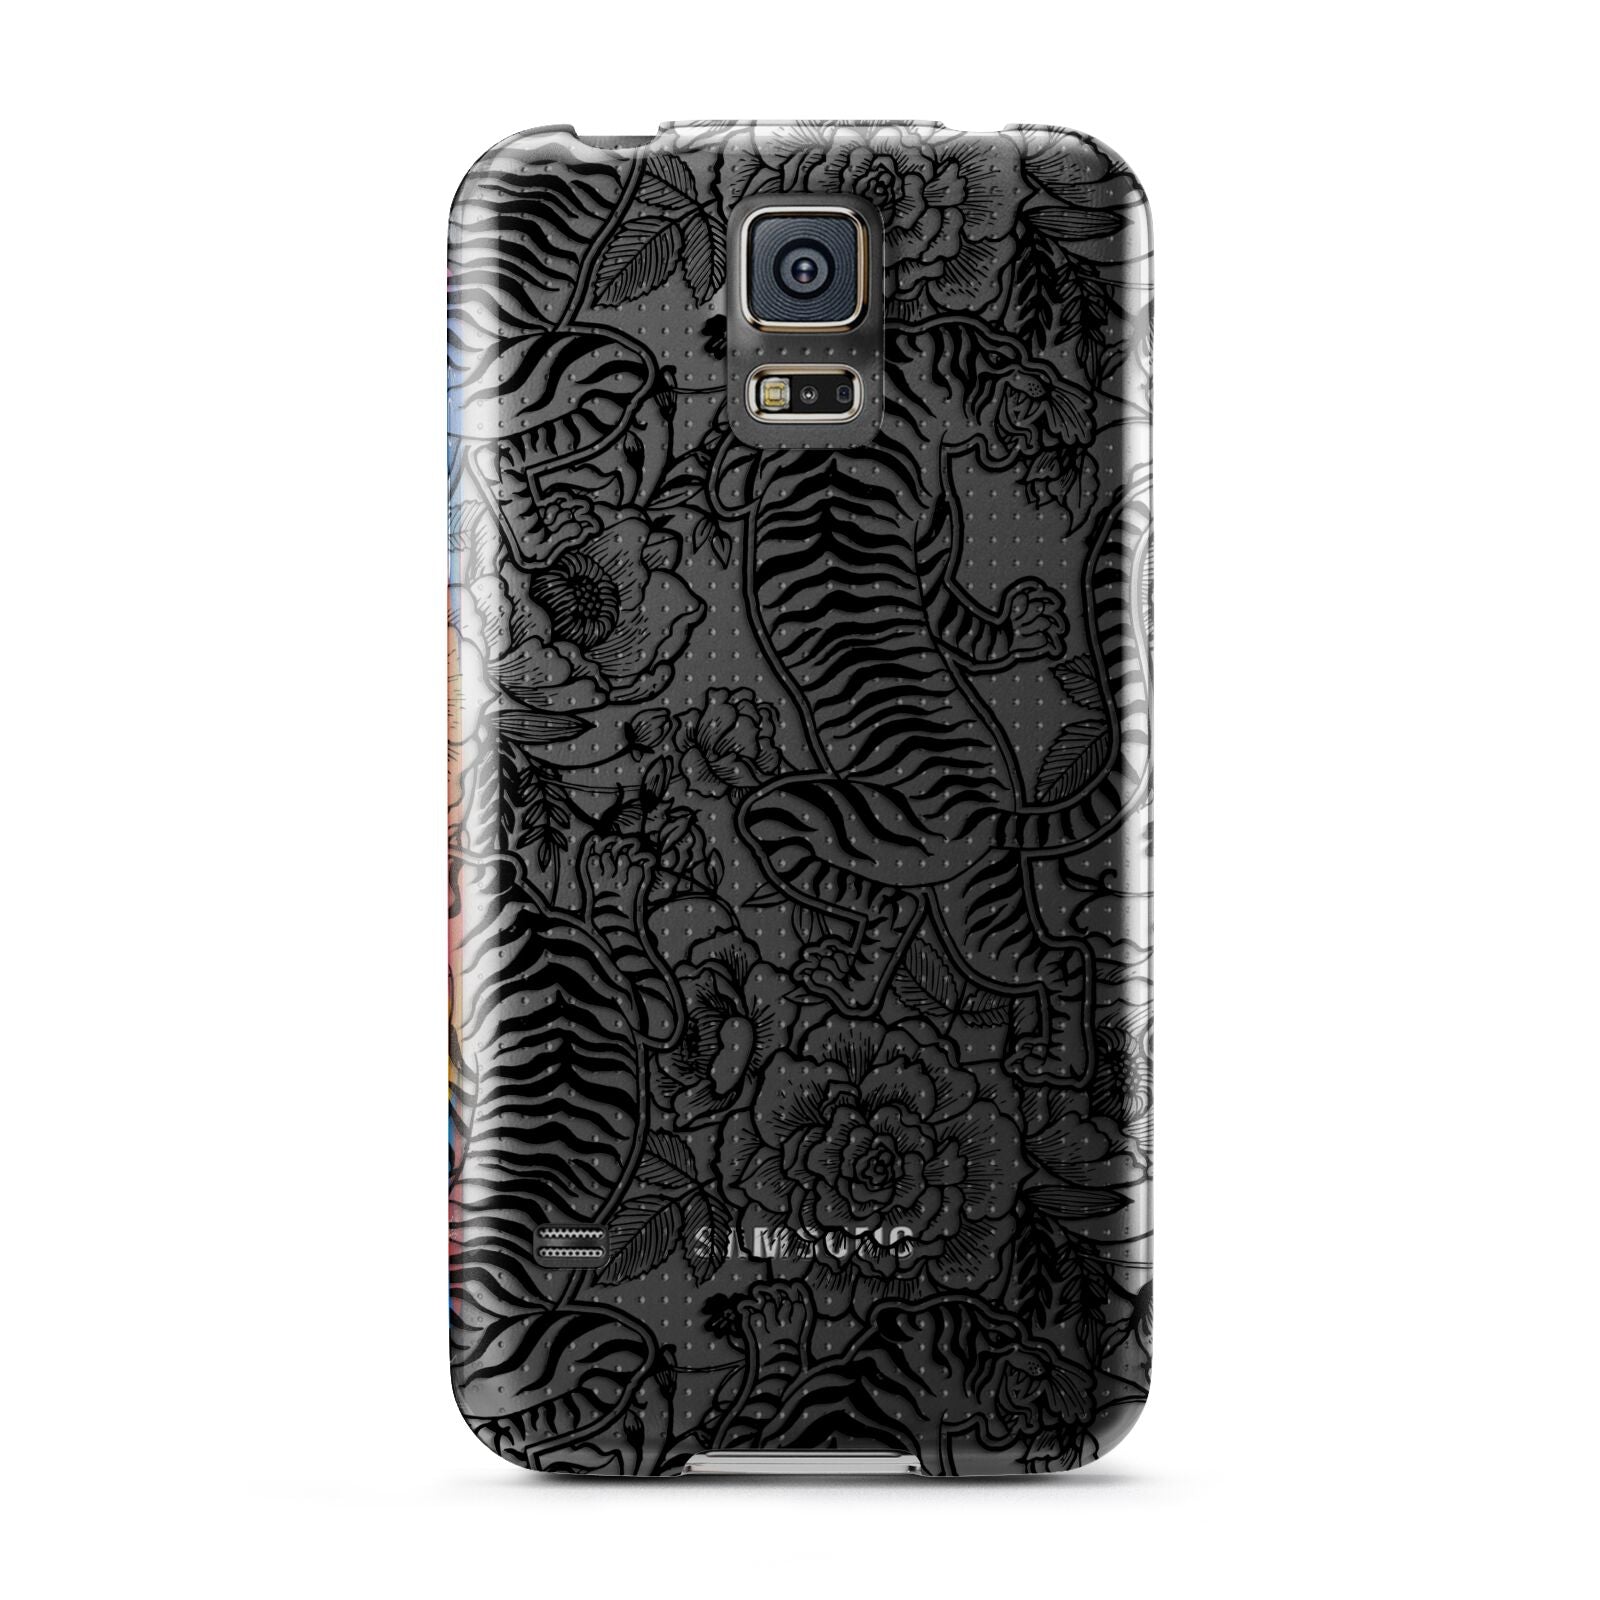 Chinese Tiger Samsung Galaxy S5 Case